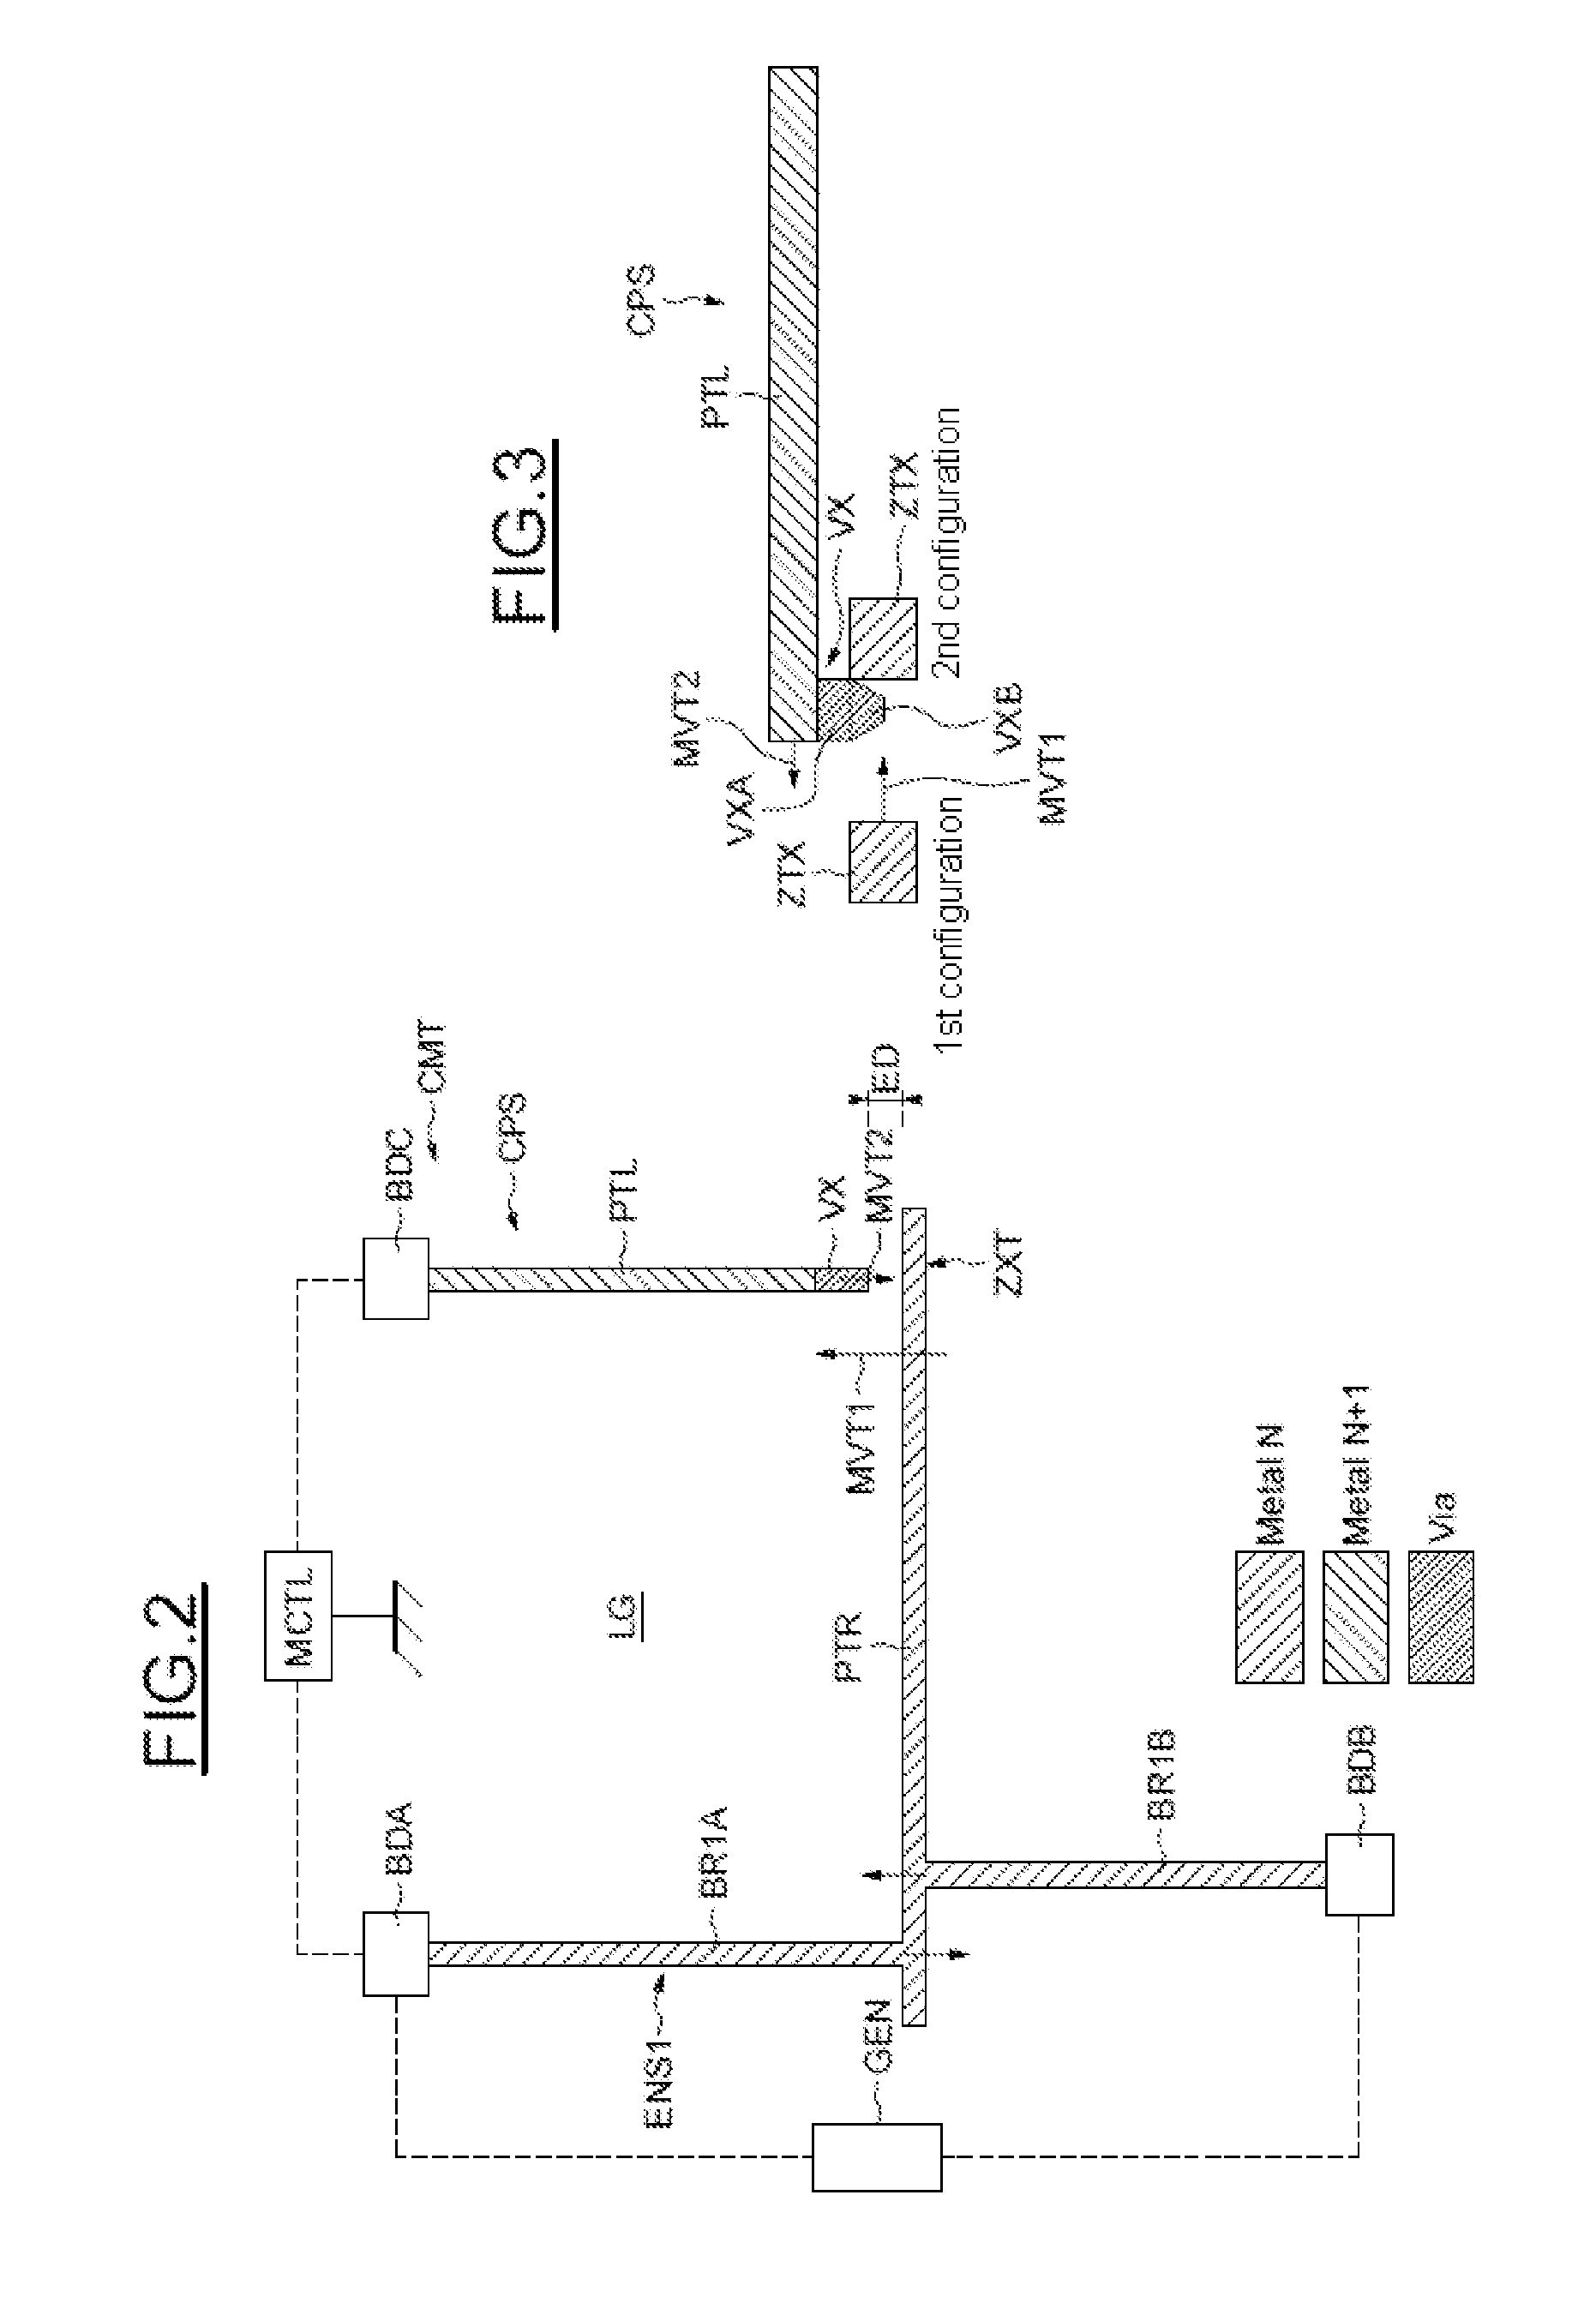 Integrated Electrical-Switching Mechanical Device Having a Blocked State